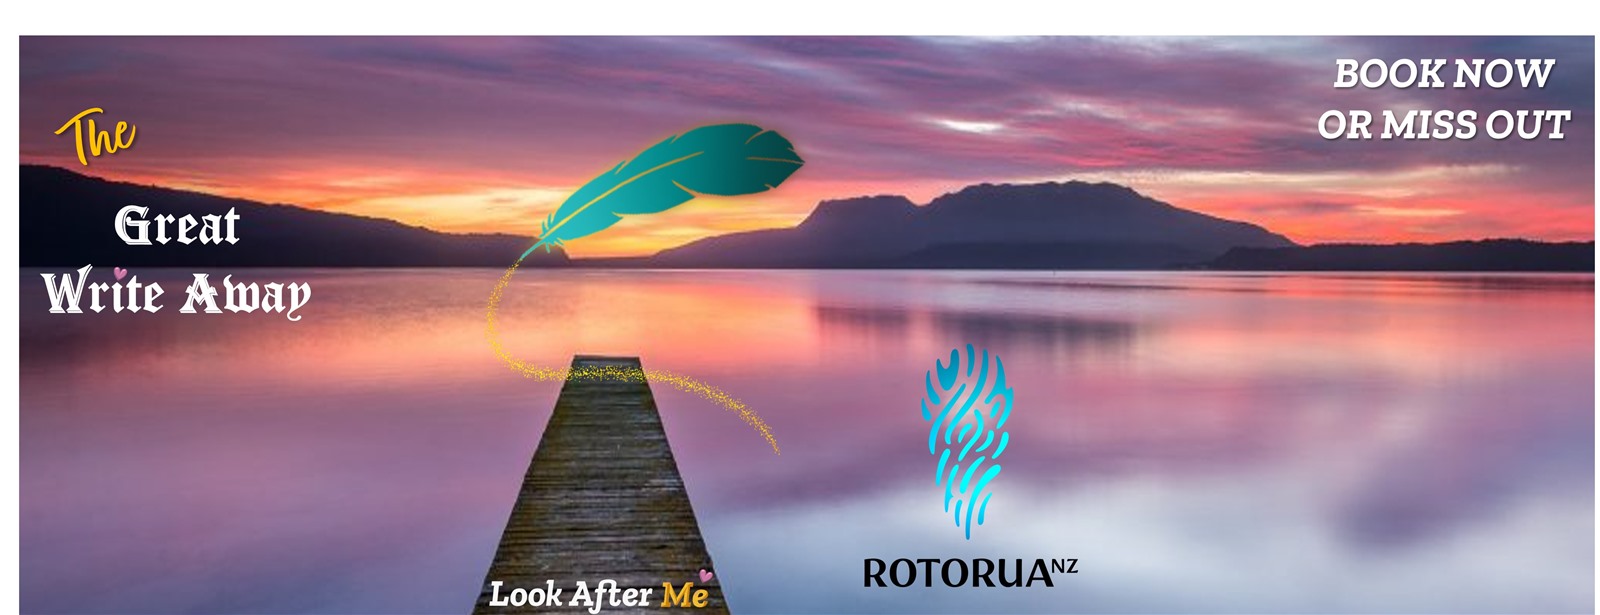 Great Write Away in Rotorua - a new holiday retreat or festival for writers